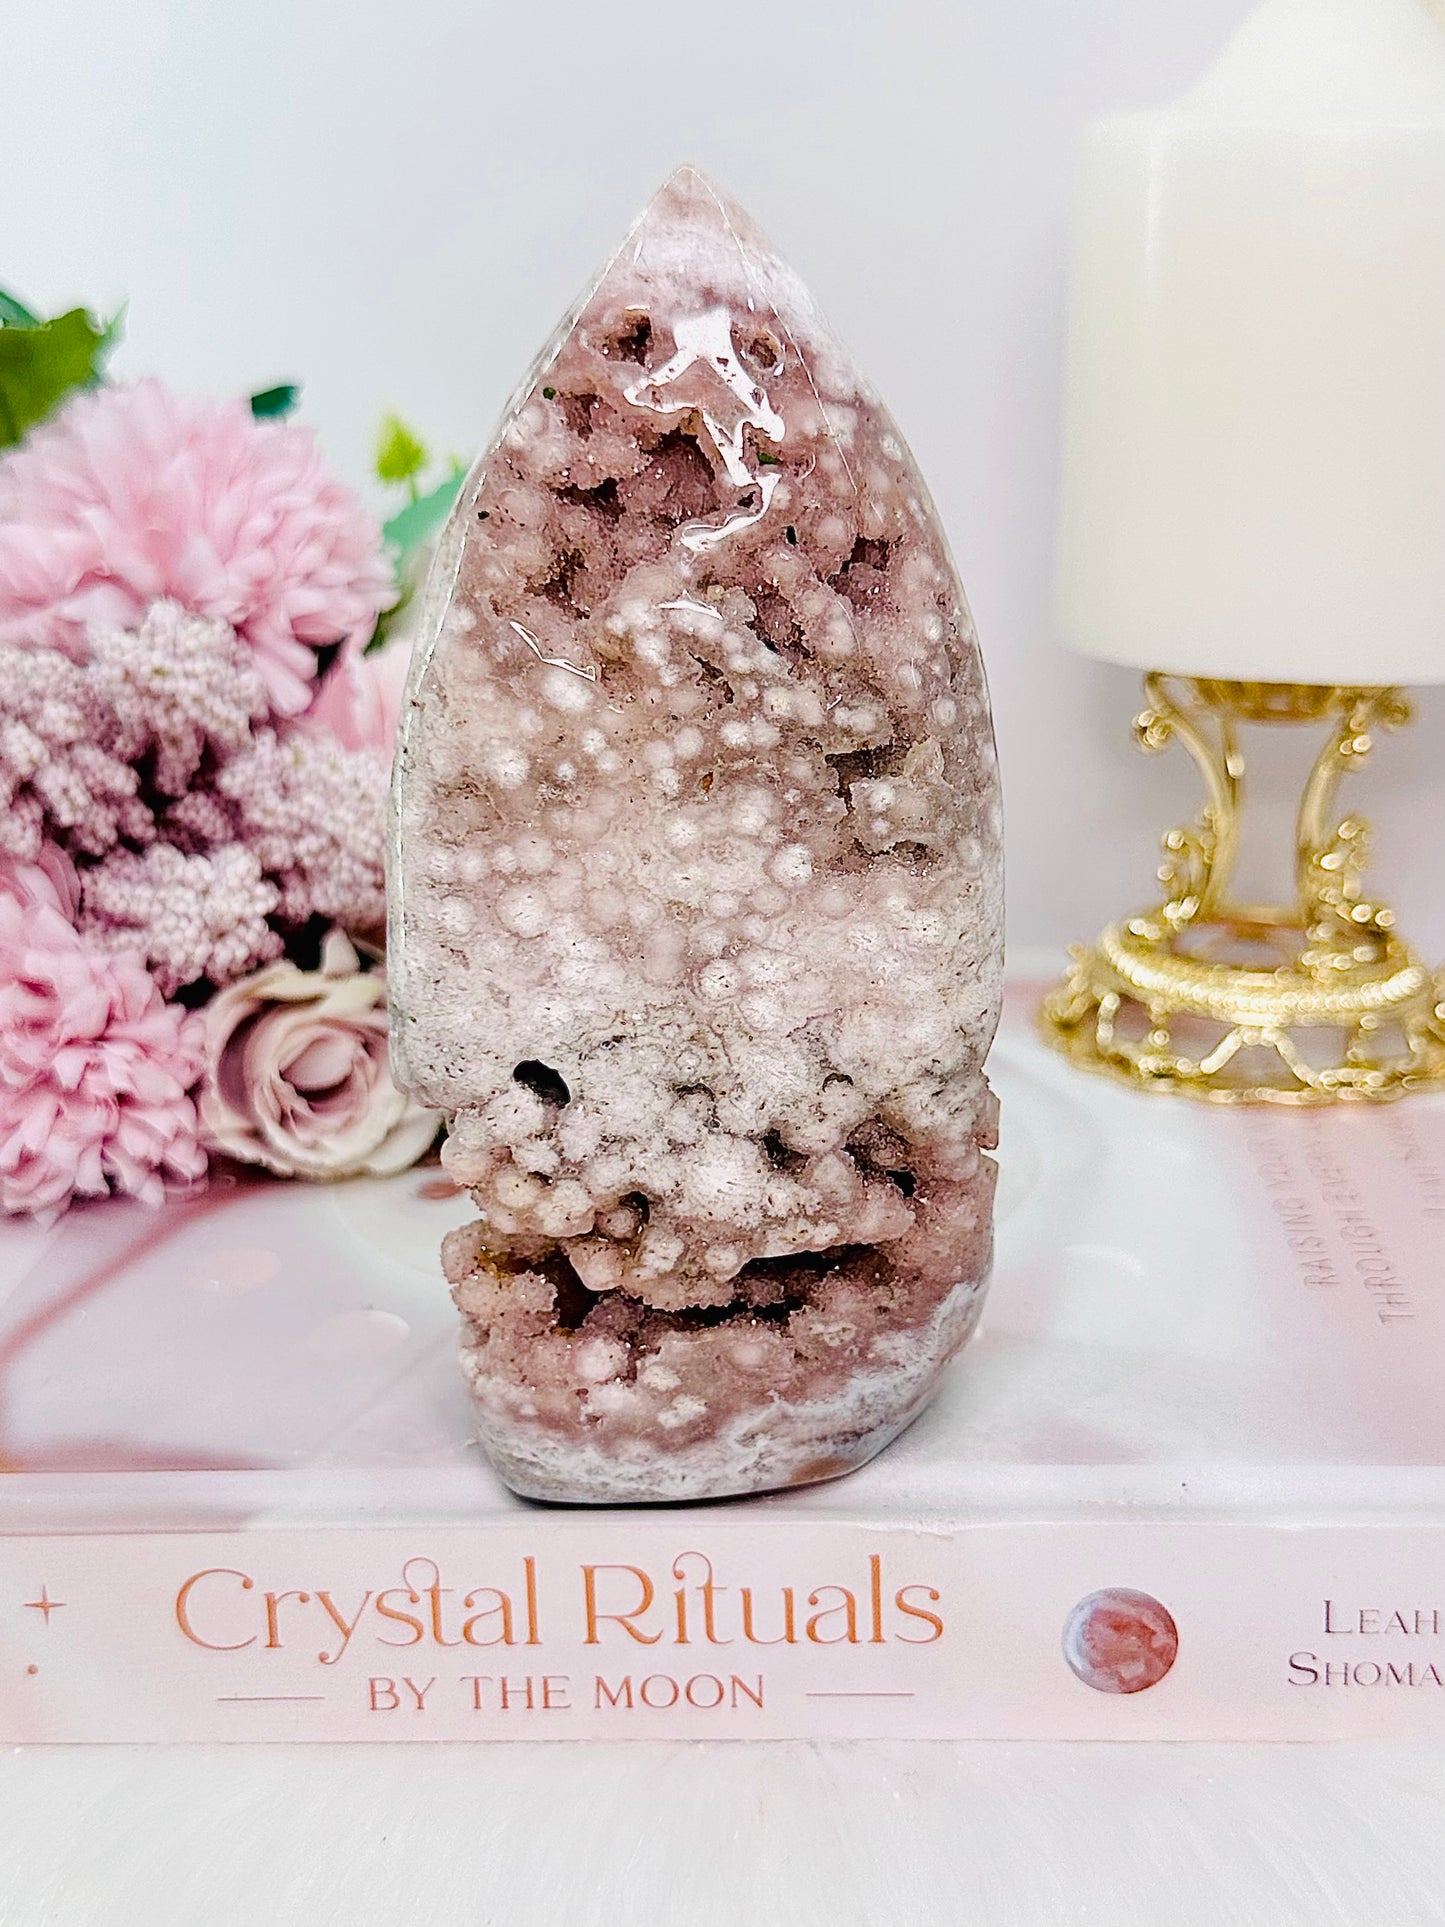 Classy & Fabulous Rare Combination Of Pink Amethyst & Flower Agate Large Druzy Freeform From Brazil 13.5cm 458grams